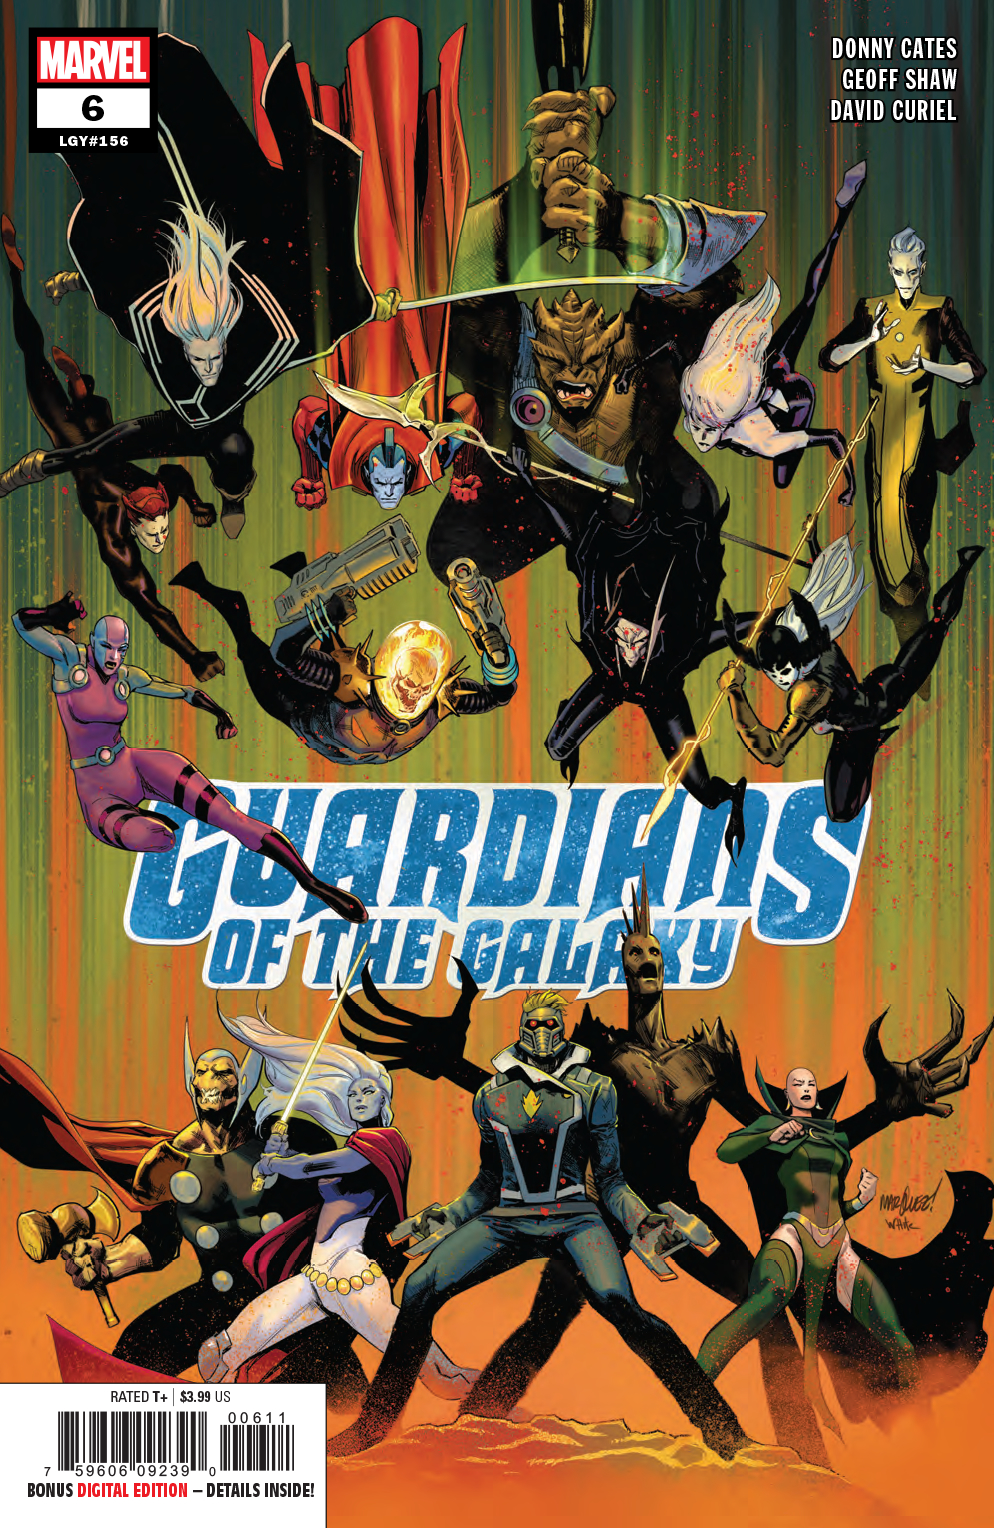 GUARDIANS OF THE GALAXY #6